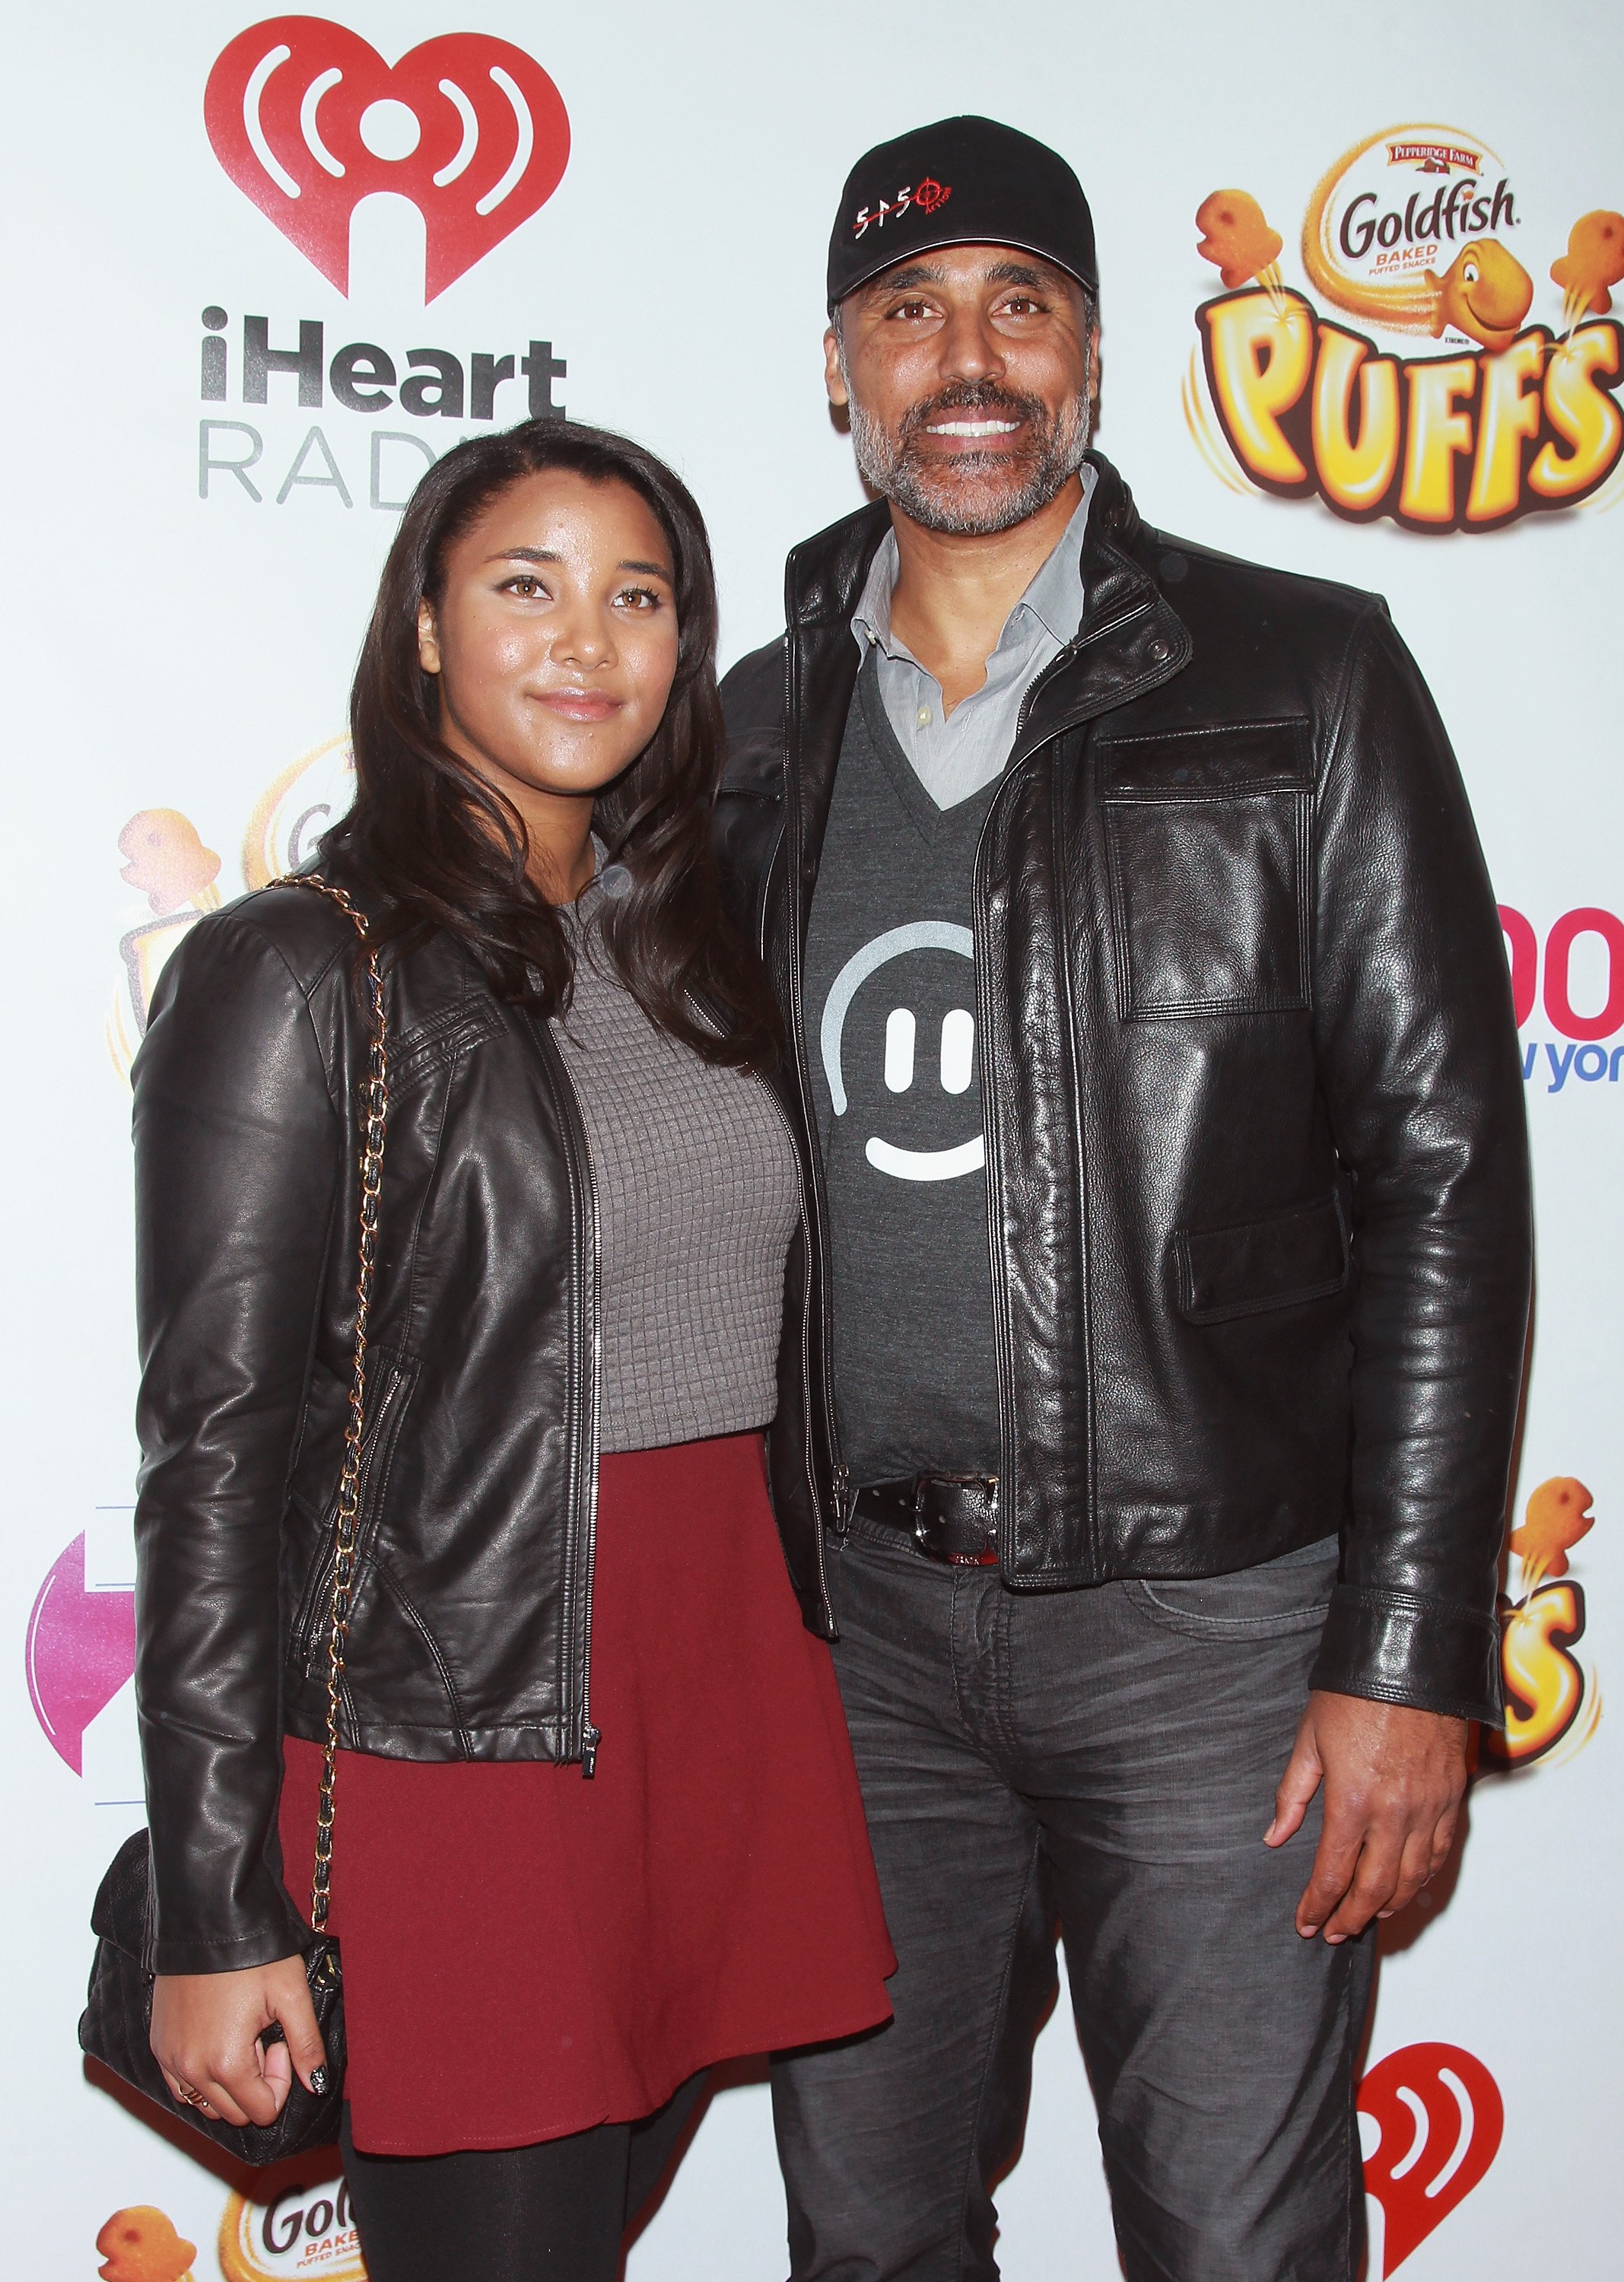 Rick Fox and his daughter Sasha Gabriella Fox attending z100s Jingle Ball at Madison Square Garden on December 12, 2014 in New York City.┃Source: Getty Images